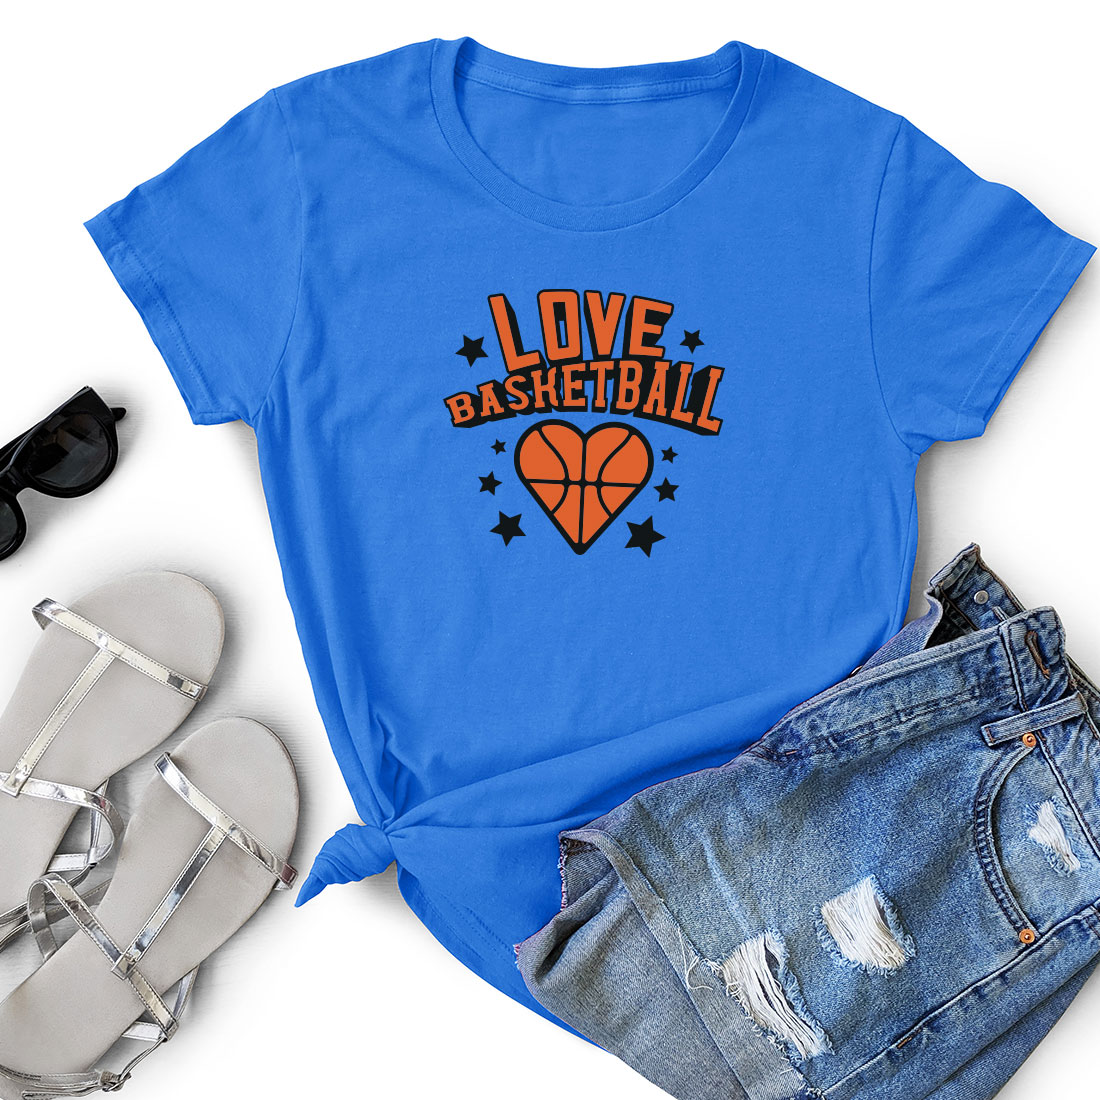 T - shirt that says love basketball and a pair of shorts.